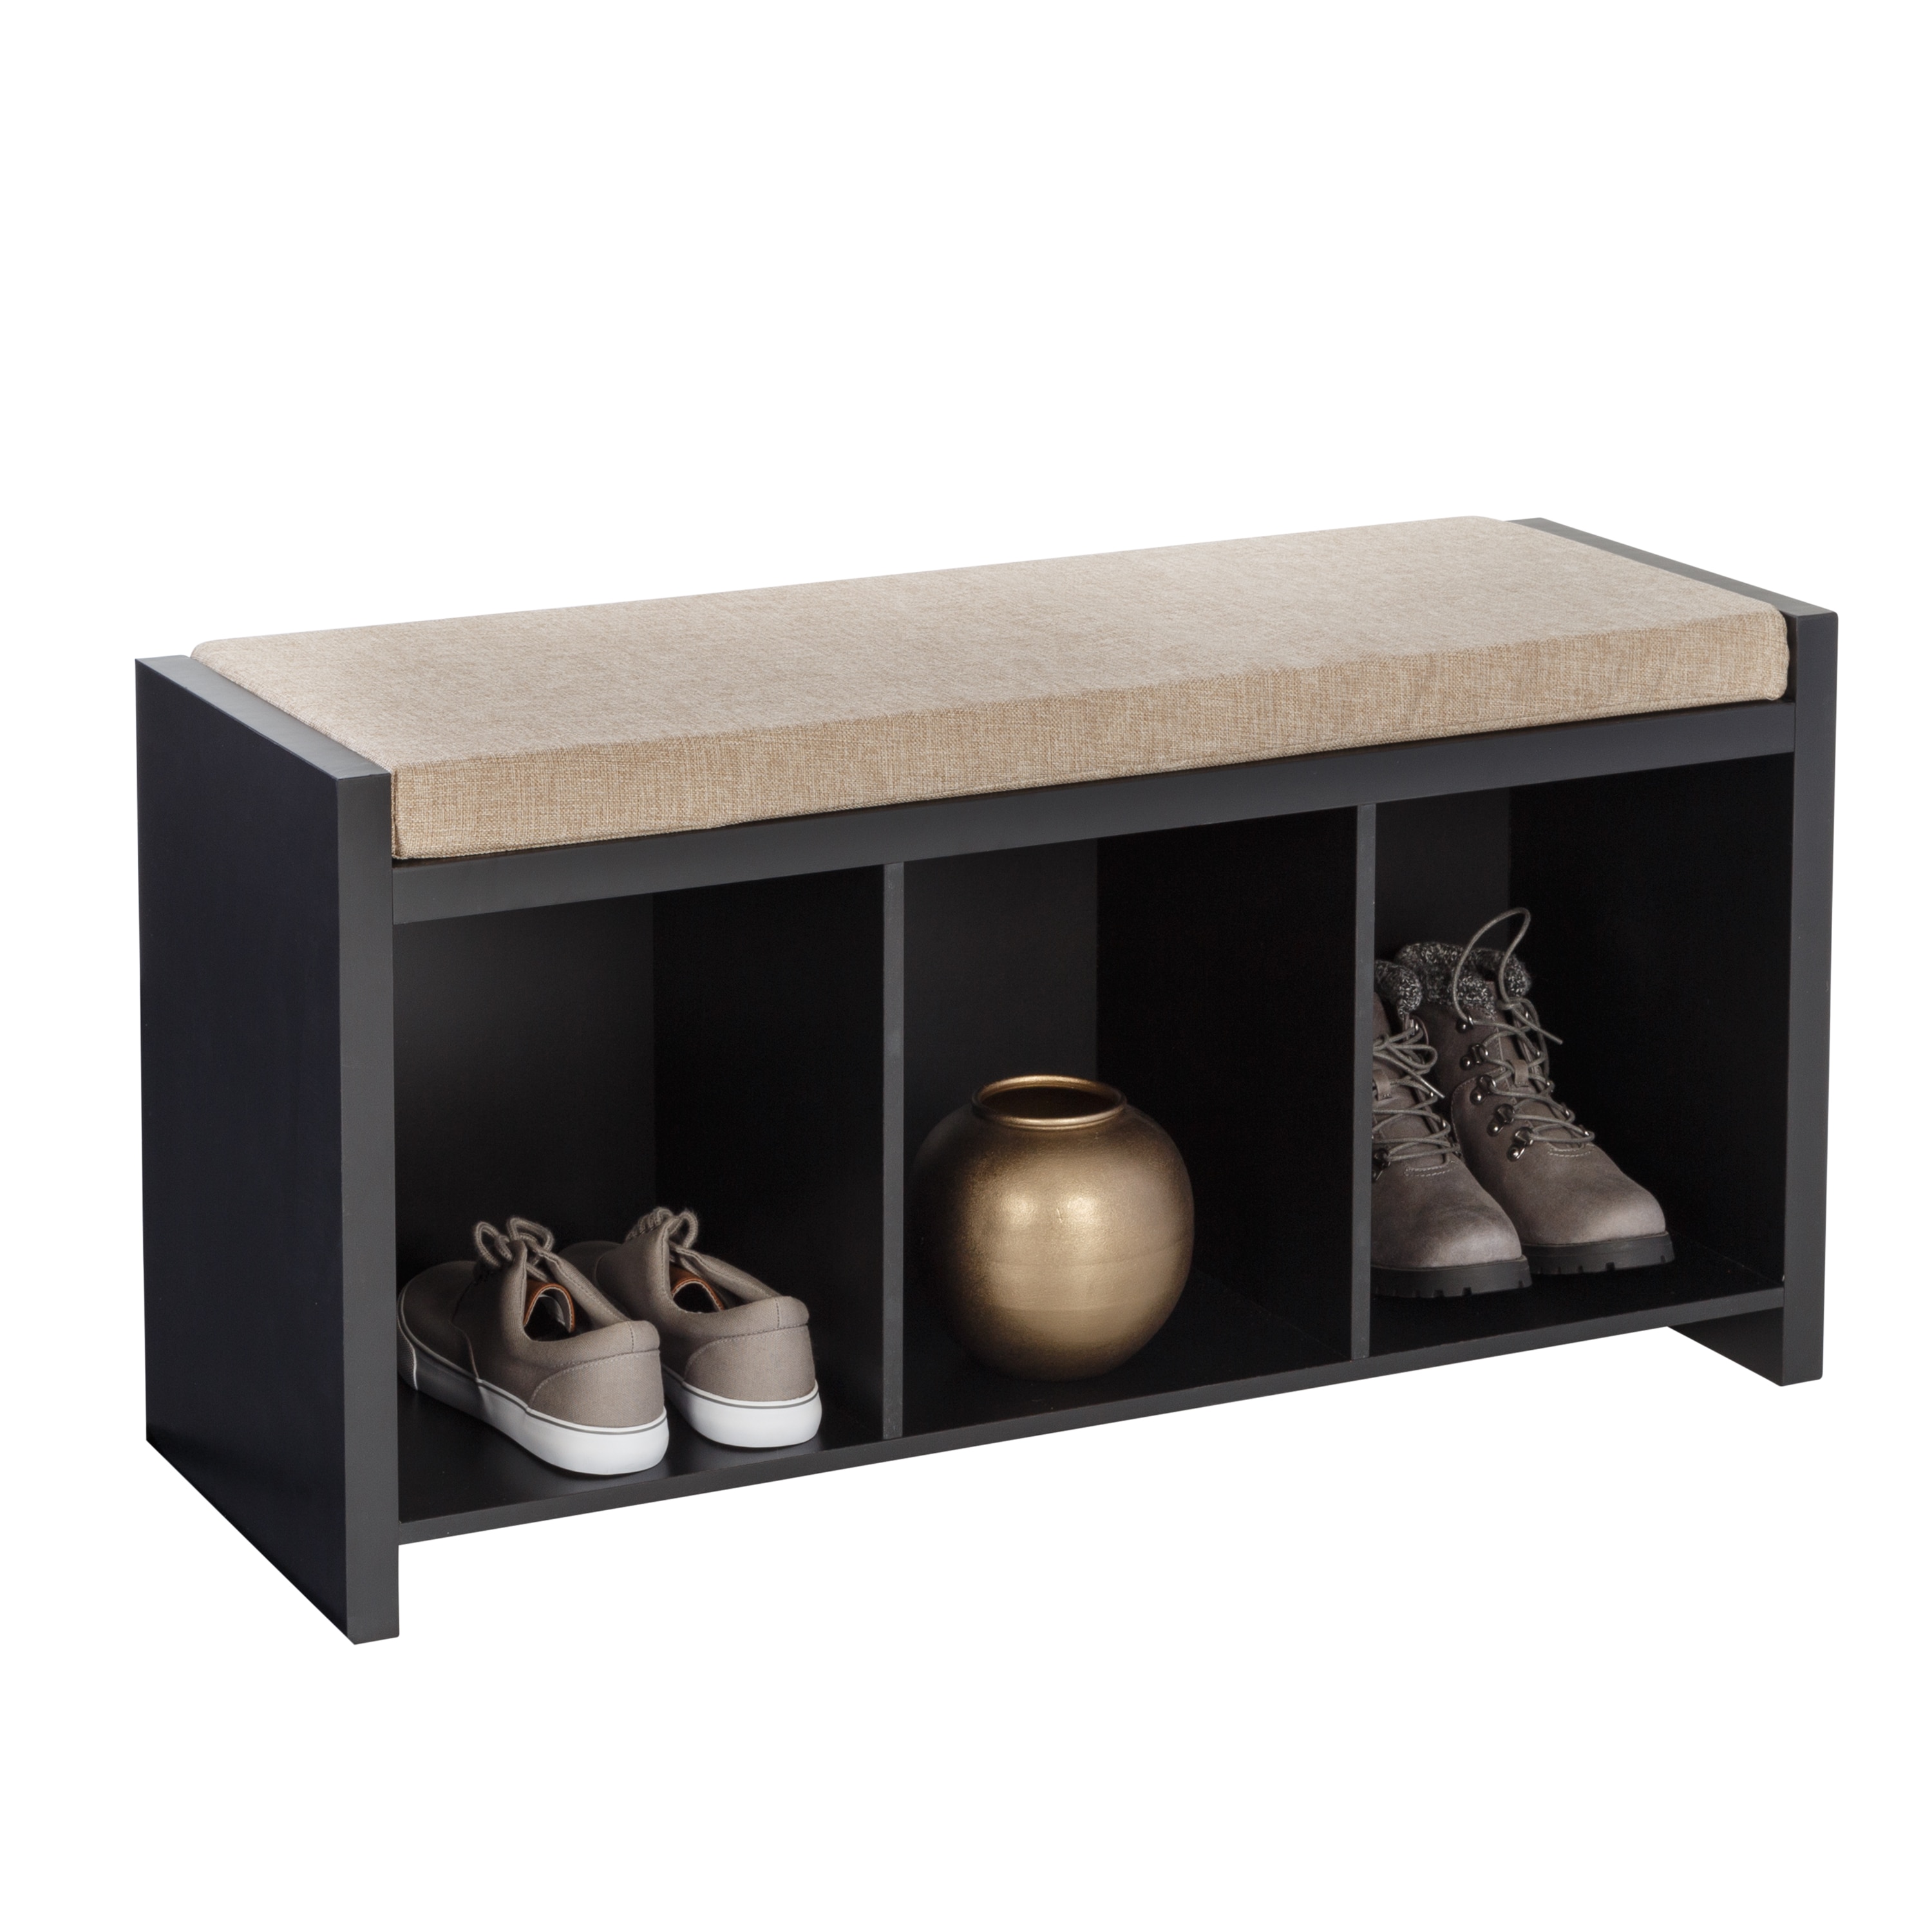 Black 3-Cubby Shoe Organizer Bench with Cushion